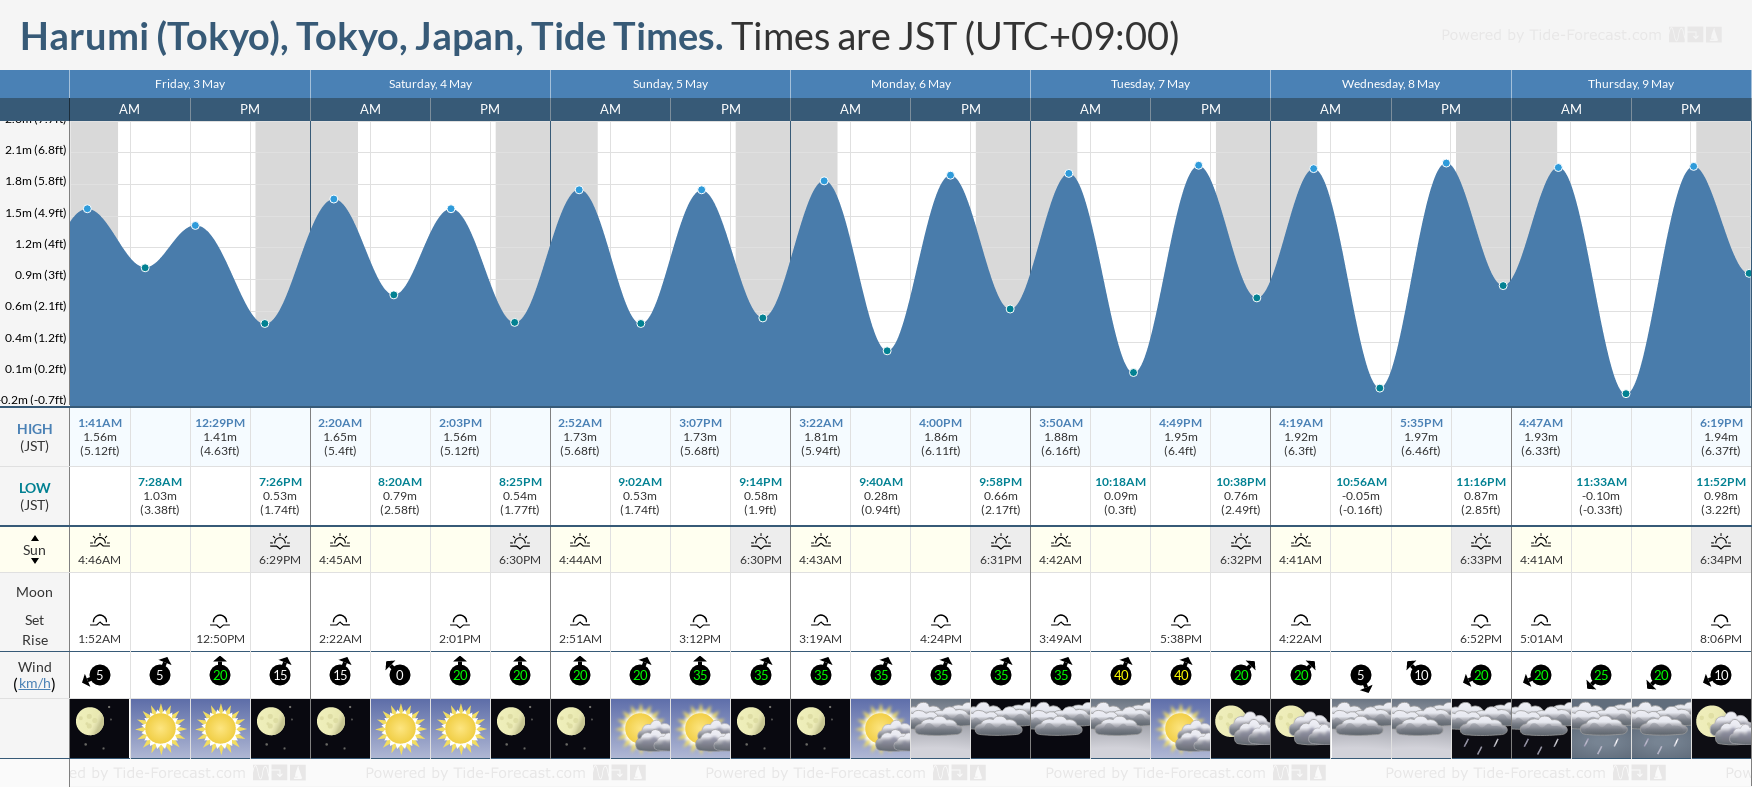 Harumi (Tokyo), Tokyo, Japan Tide Chart including high and low tide tide times for the next 7 days